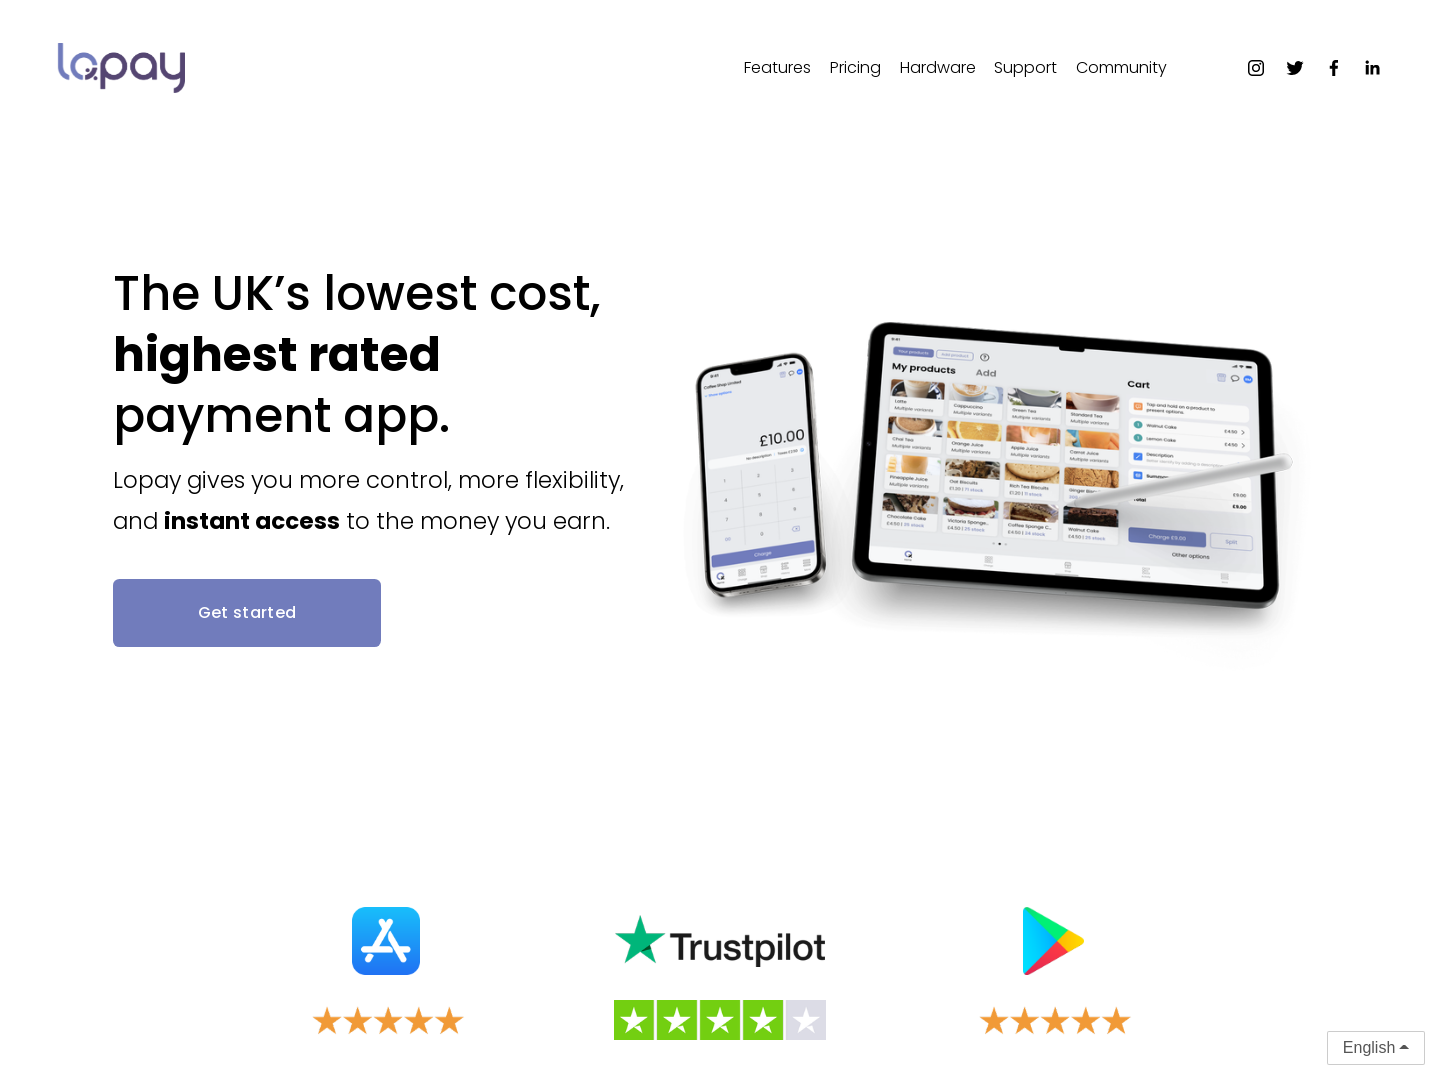 London-Based Startup Lopay Raises £6M in Seed Funding